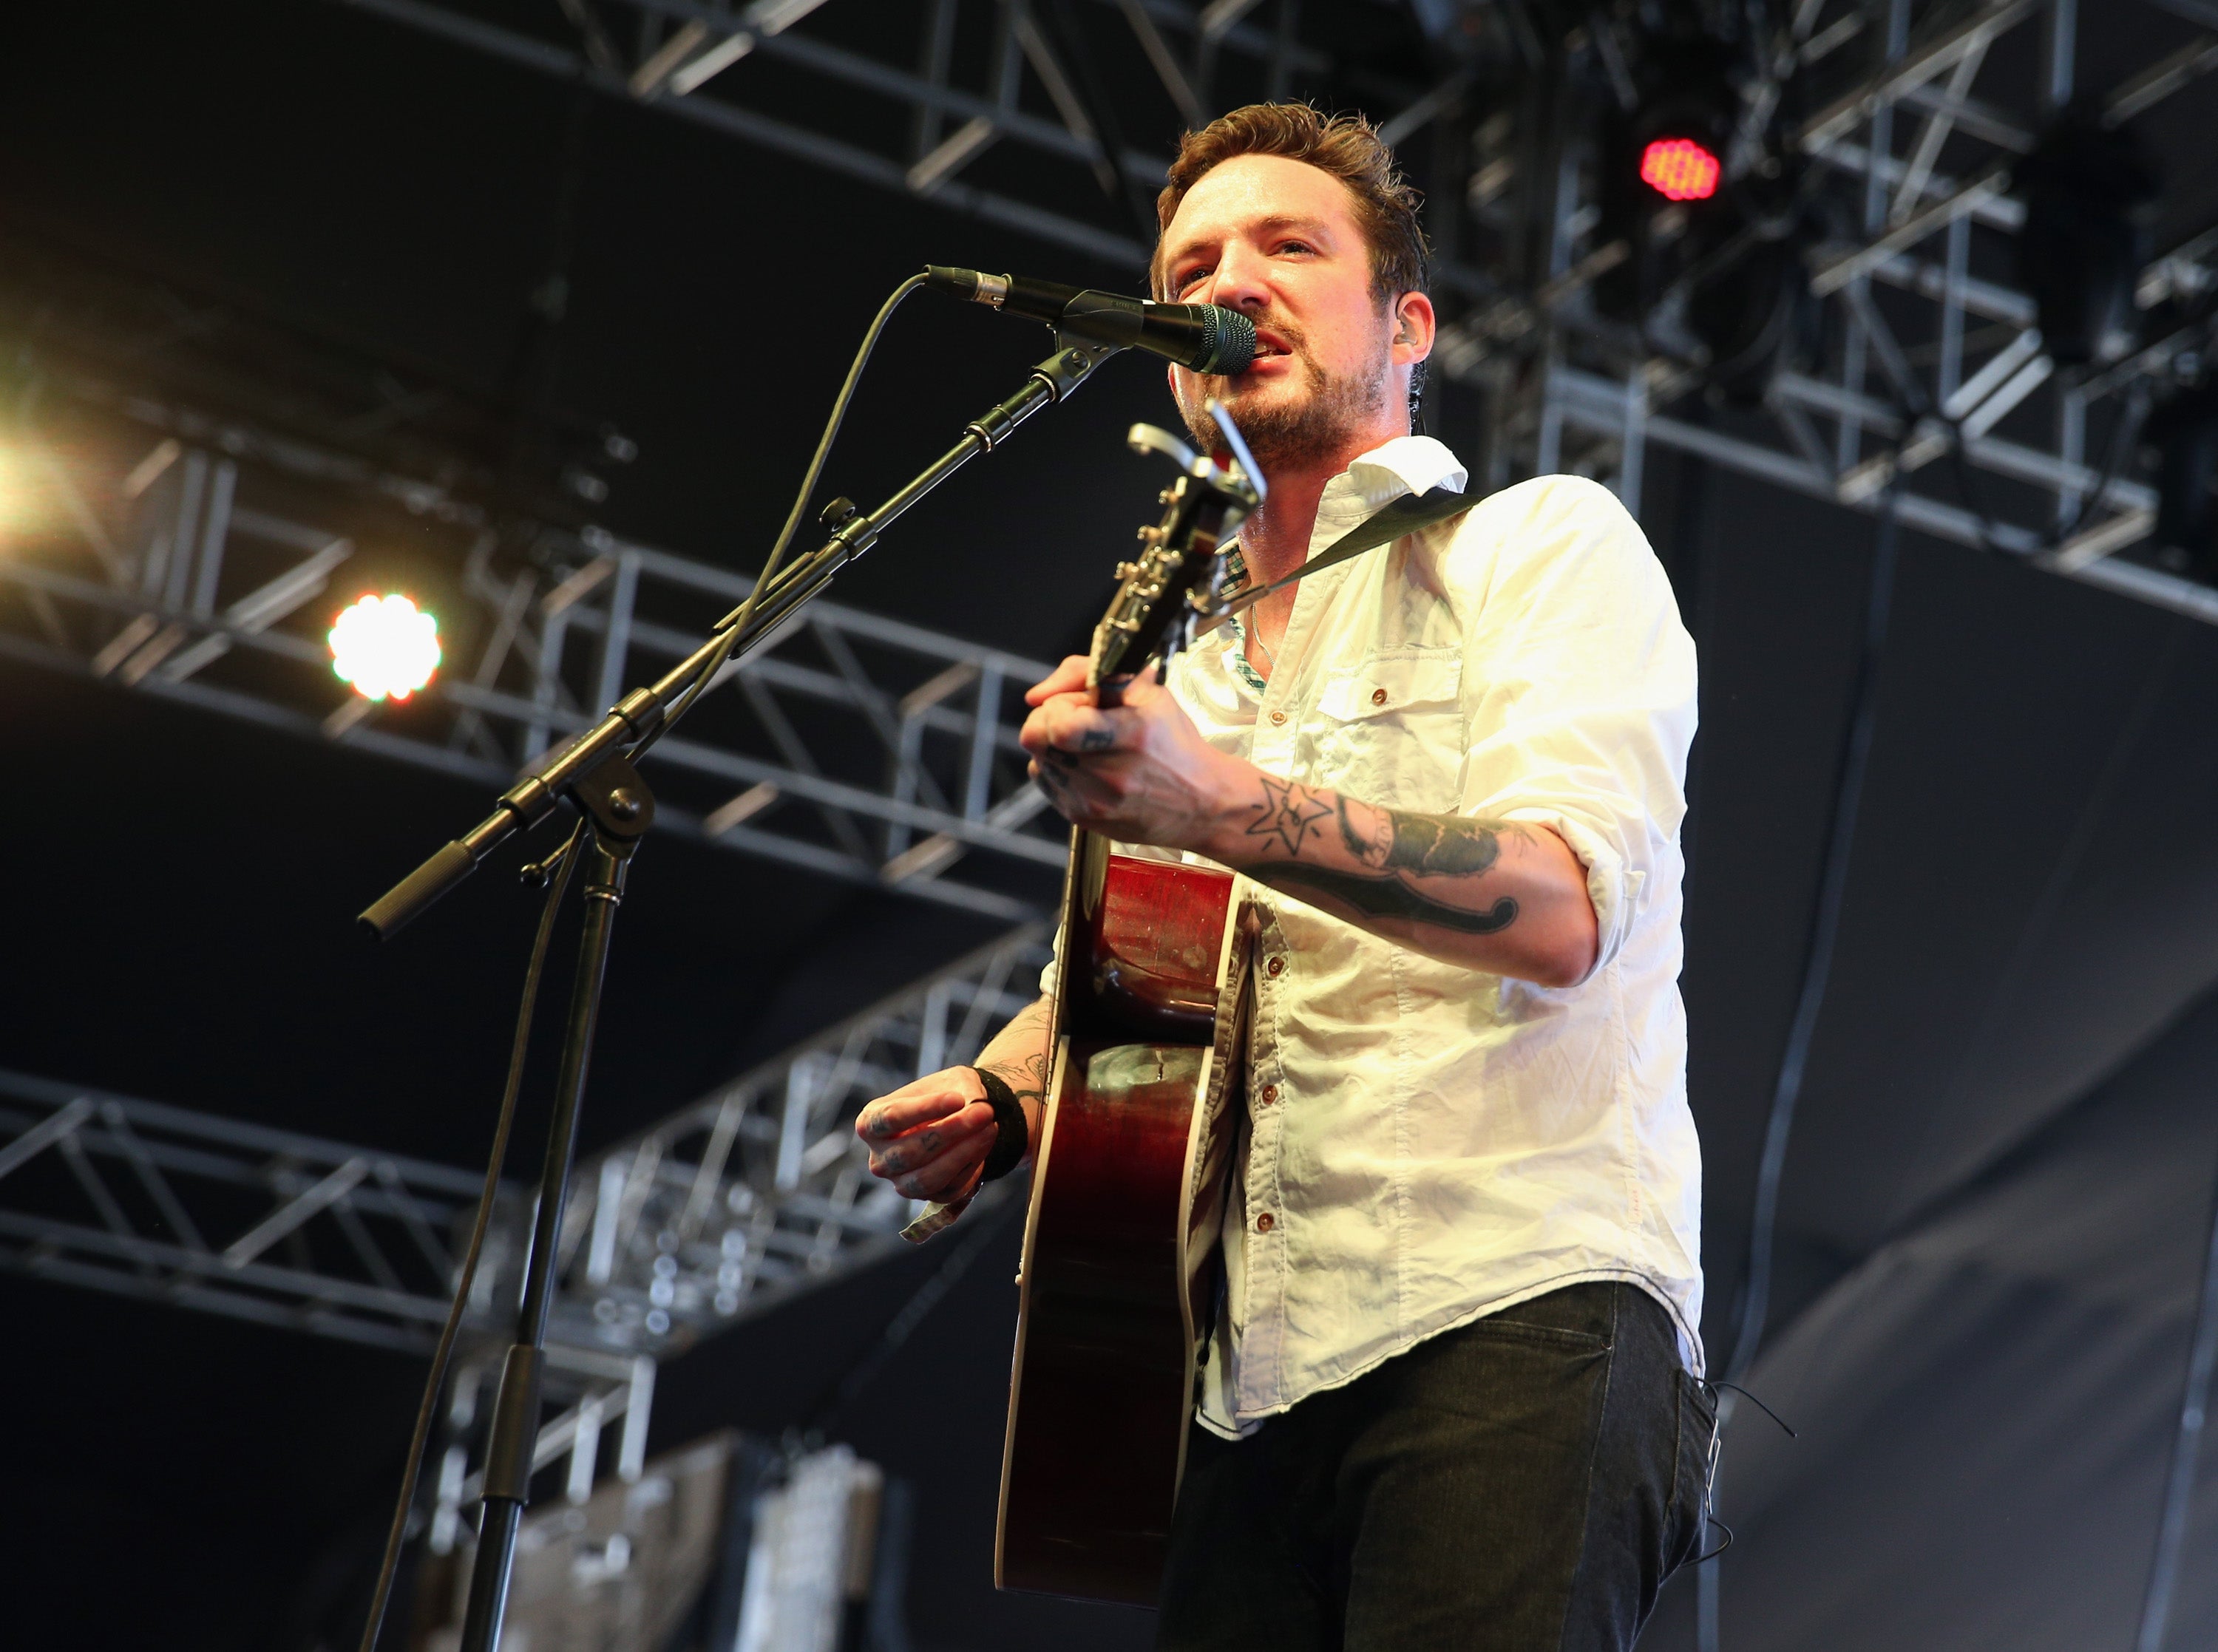 Frank Turner will play the Avalon Stage